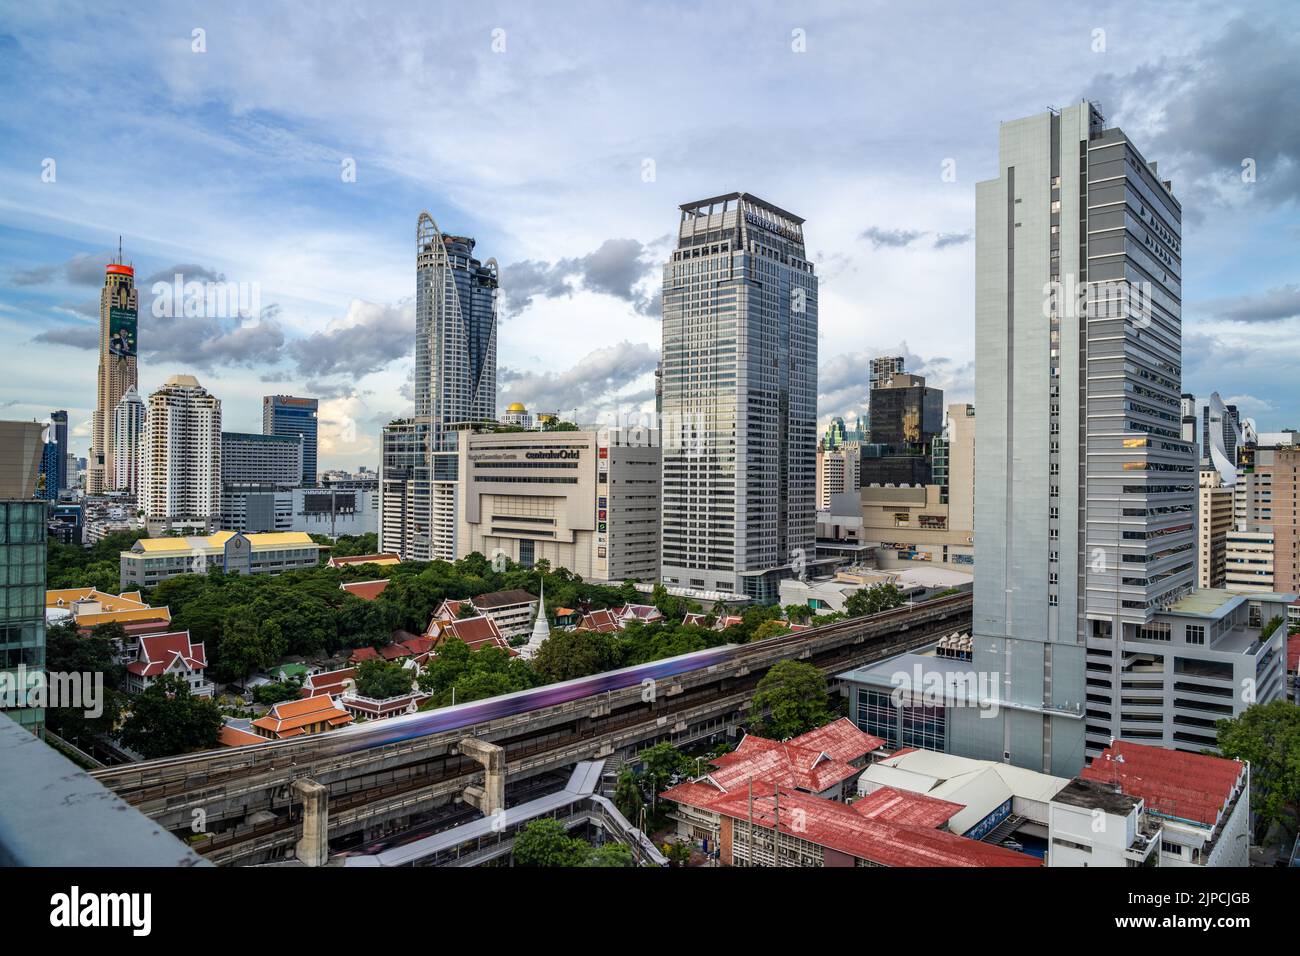 Bangkok, Thailand - 10 August 2022 - Aerial view of Bangkok cityscape showing high-rises and running BTS skytrains with cloudy blue sky Stock Photo